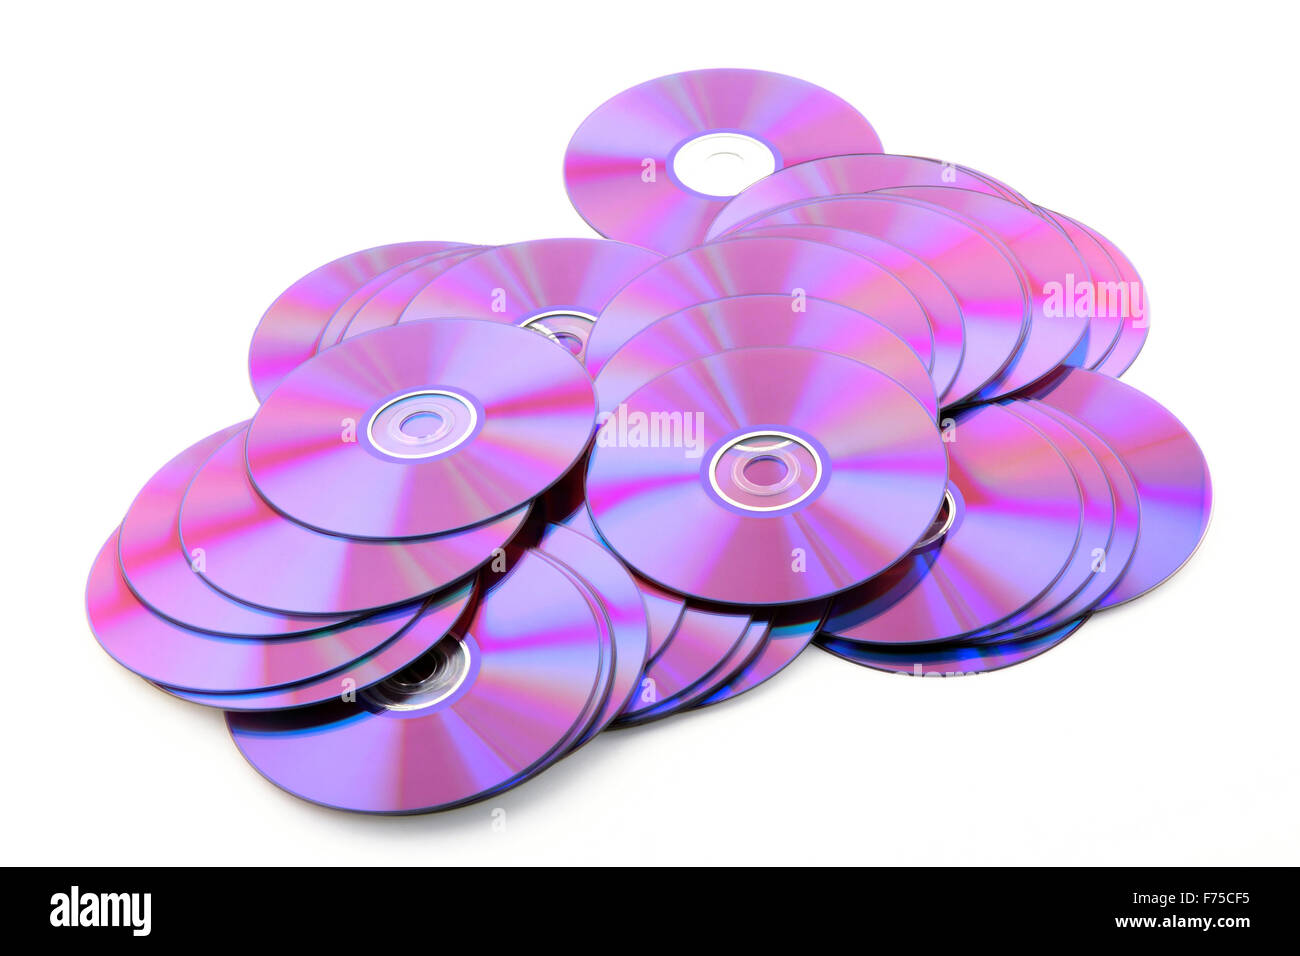 Pile of colorful DVDs or CDs on white background Stock Photo